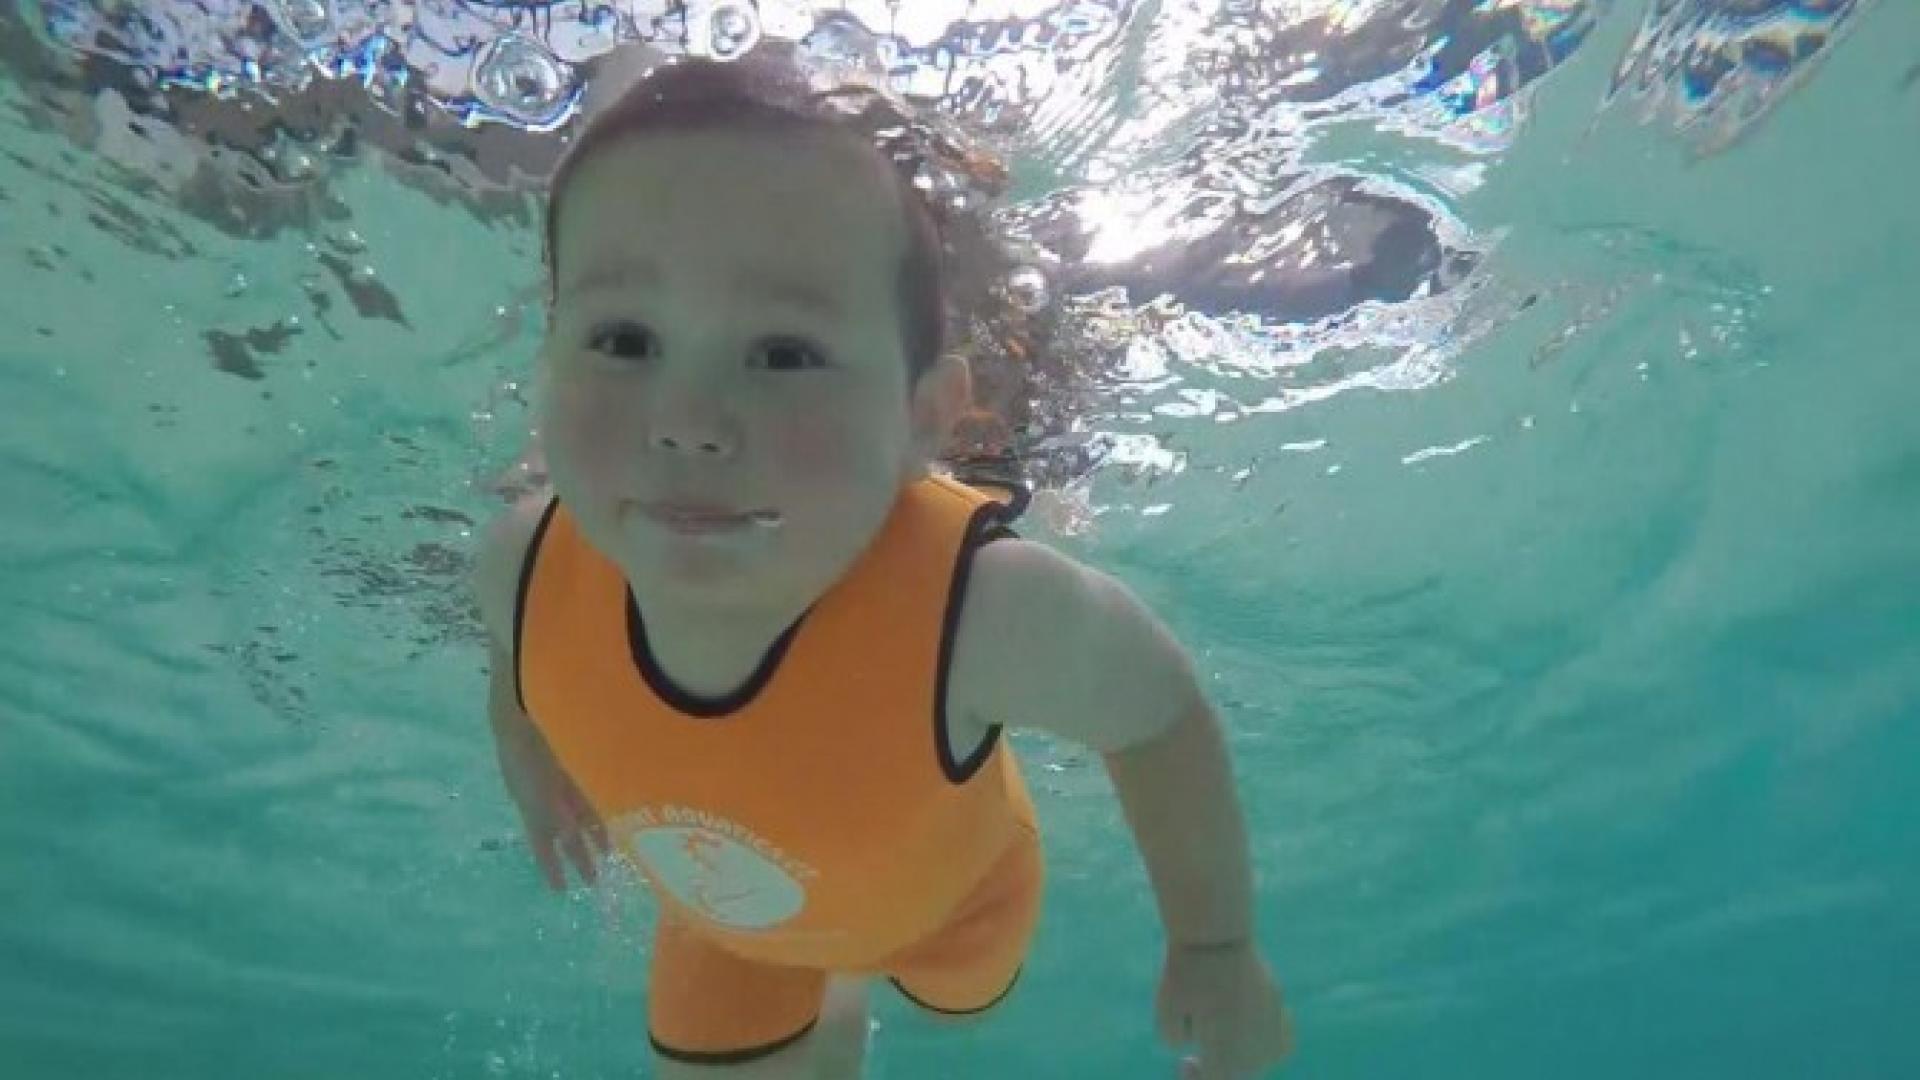 swimming lessons for babies under 6 months